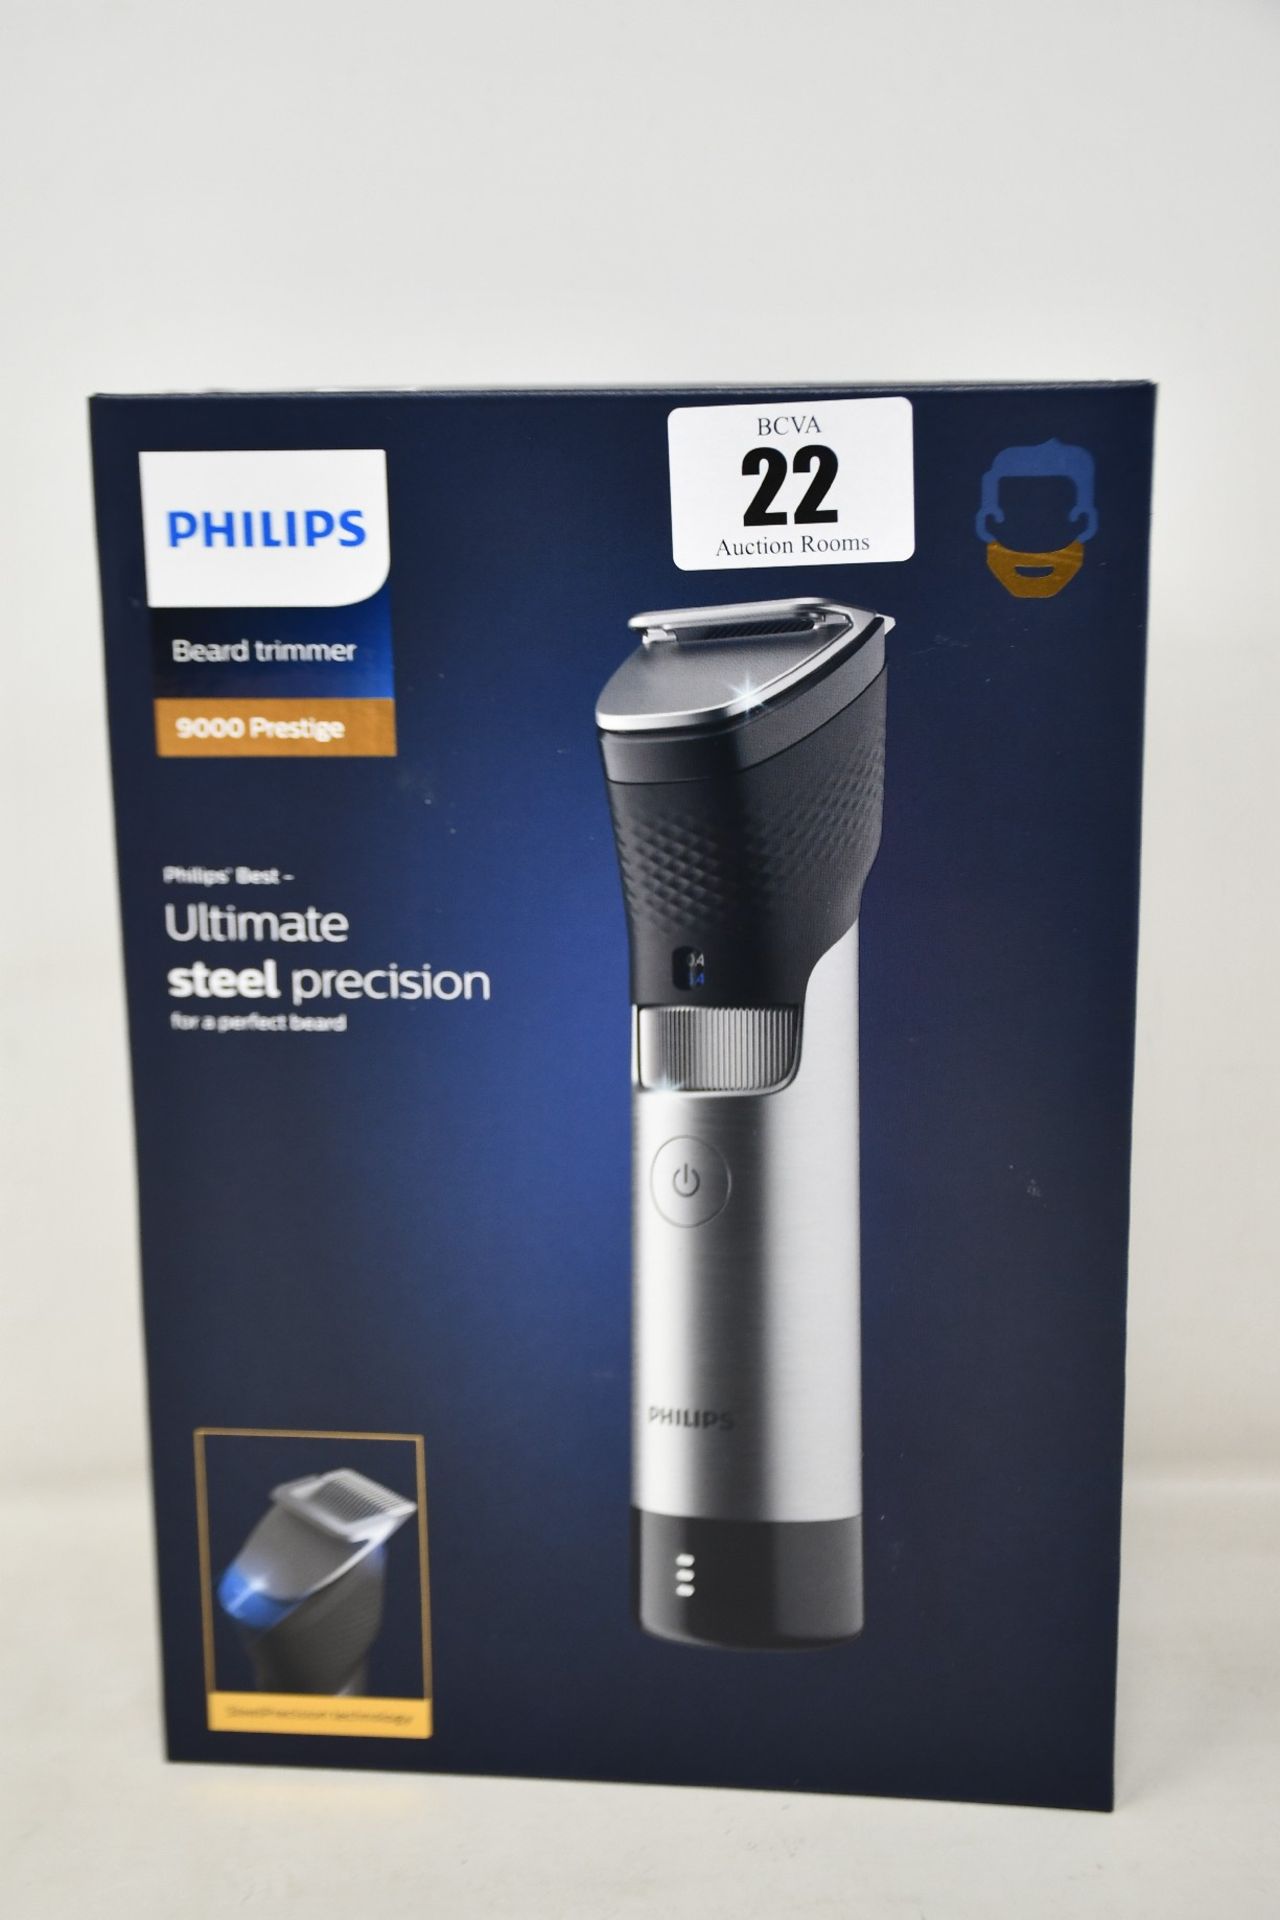 A boxed as new Philips 9000 prestige beard trimmer (BT9810/13).